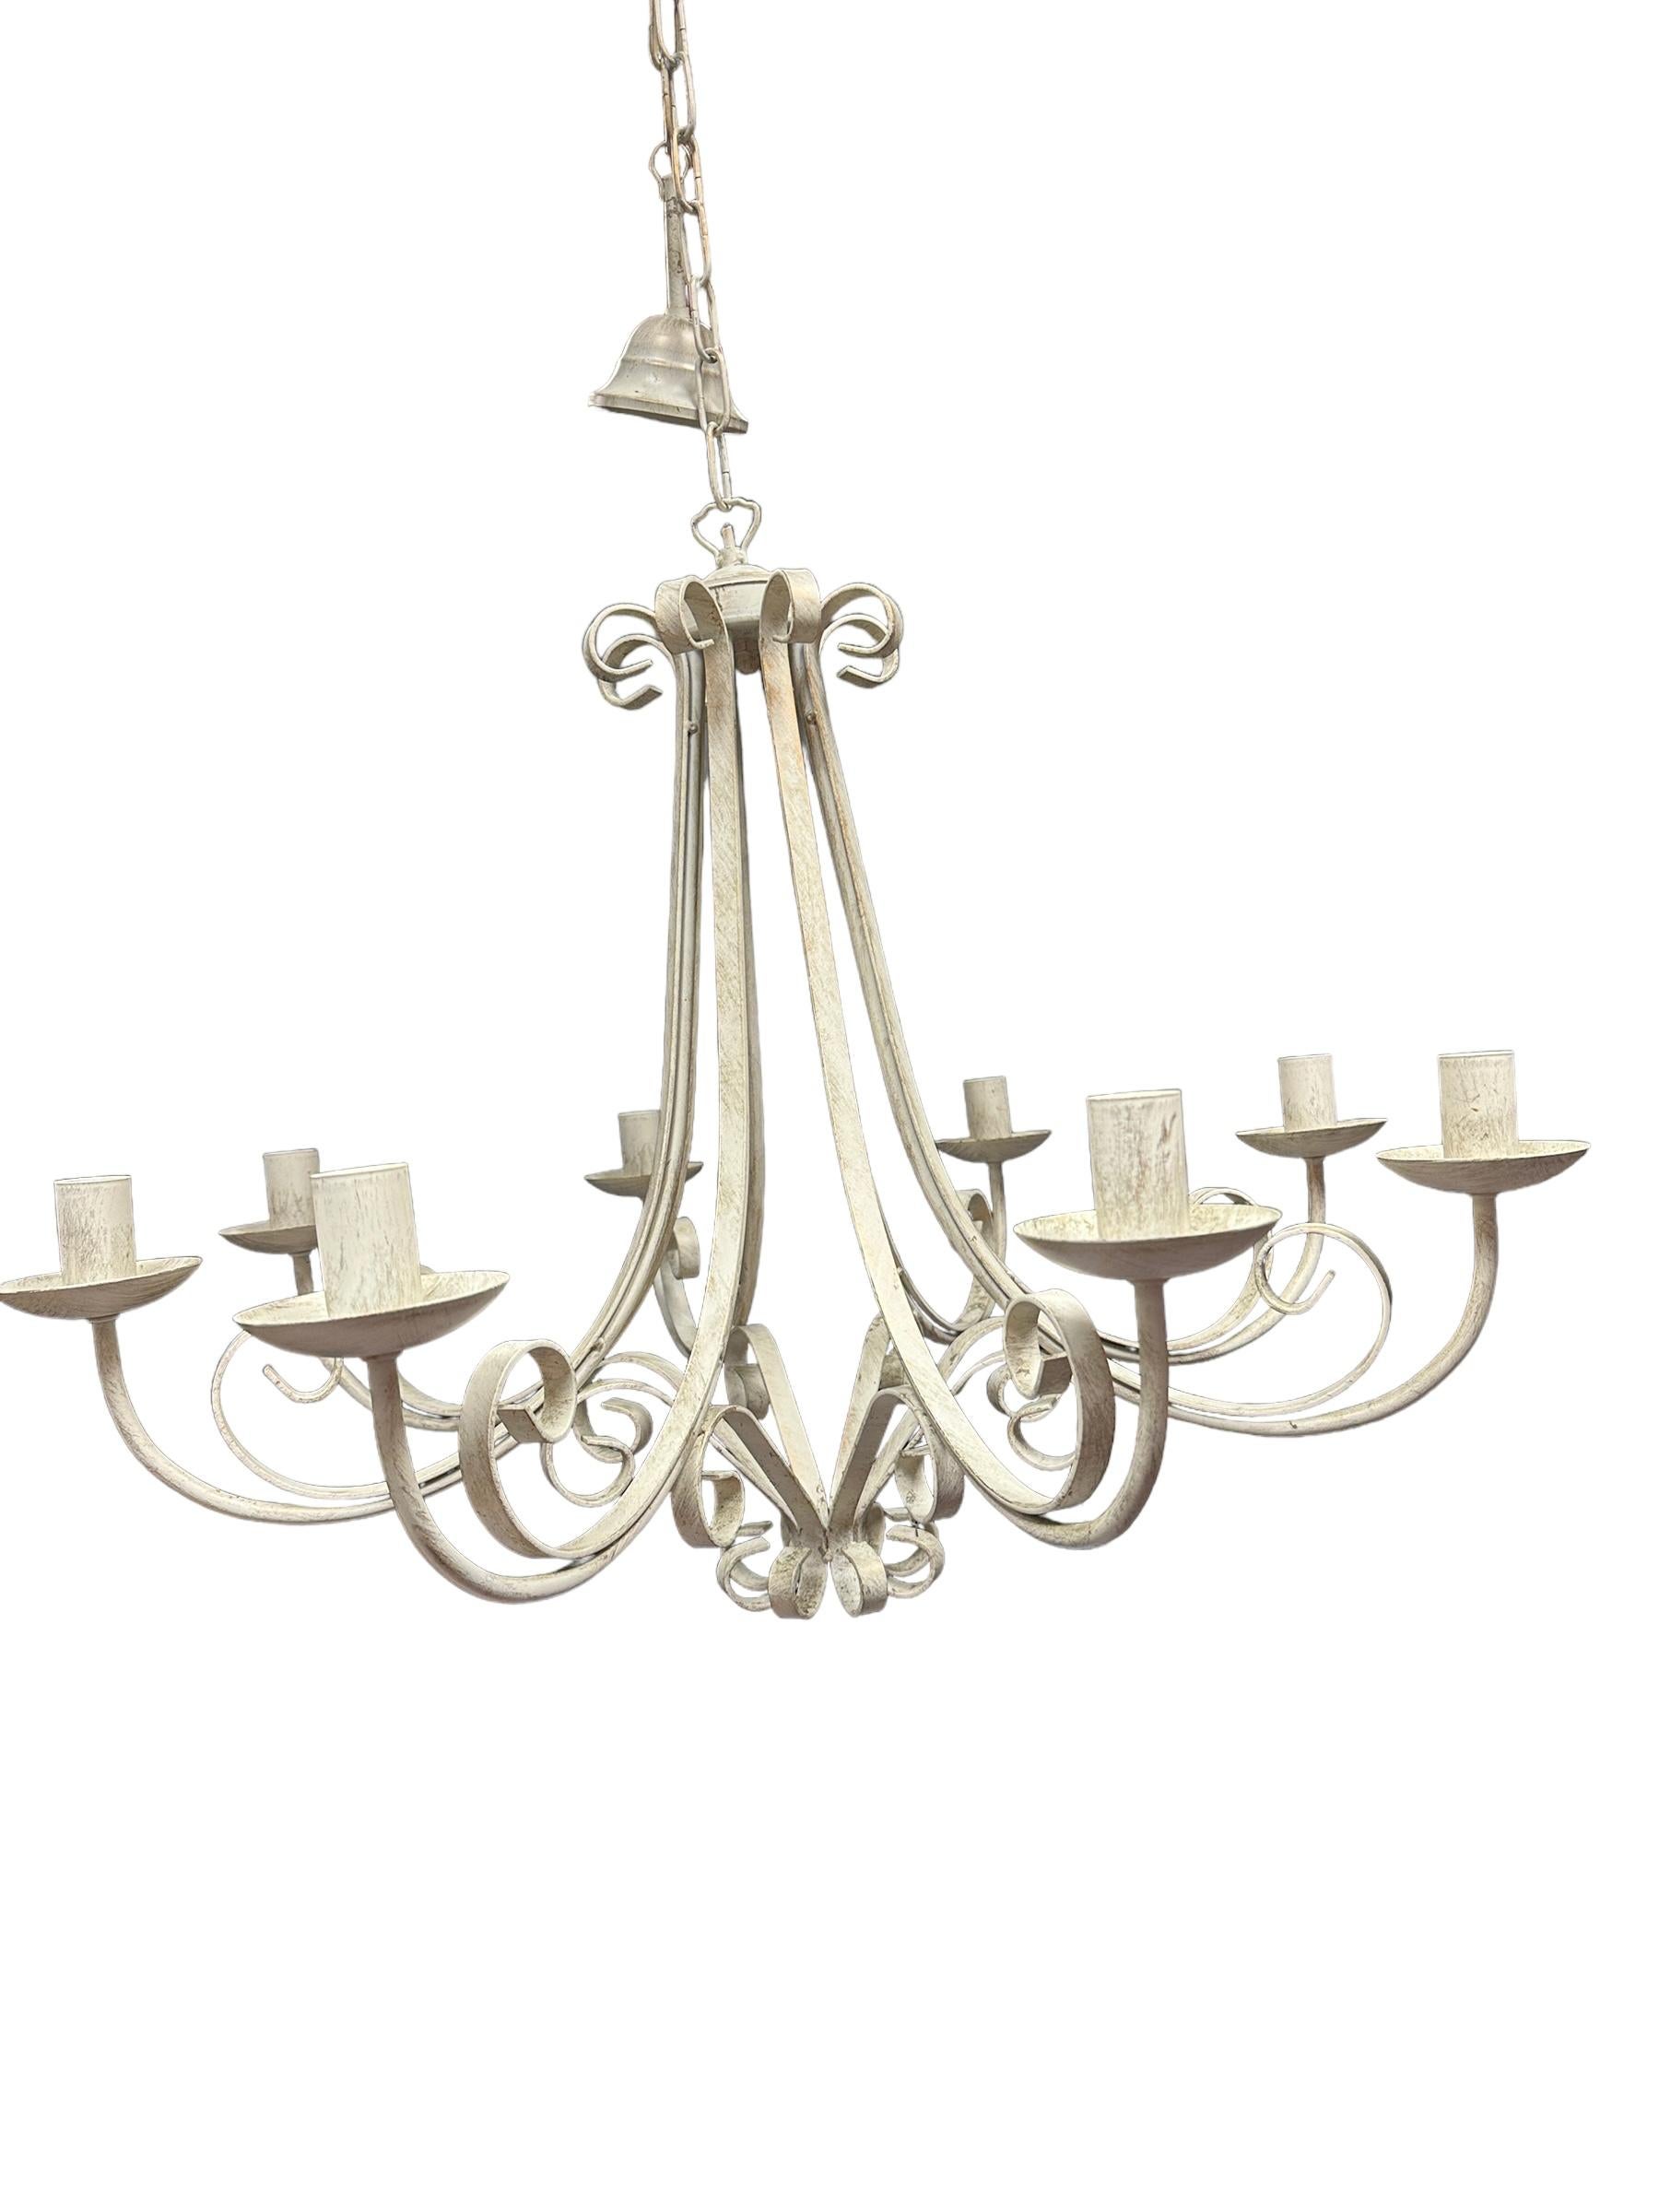 Monumental Iron Shabby White Colored Chandelier, Honsel Leuchten Germany 1980's In Good Condition For Sale In Nuernberg, DE